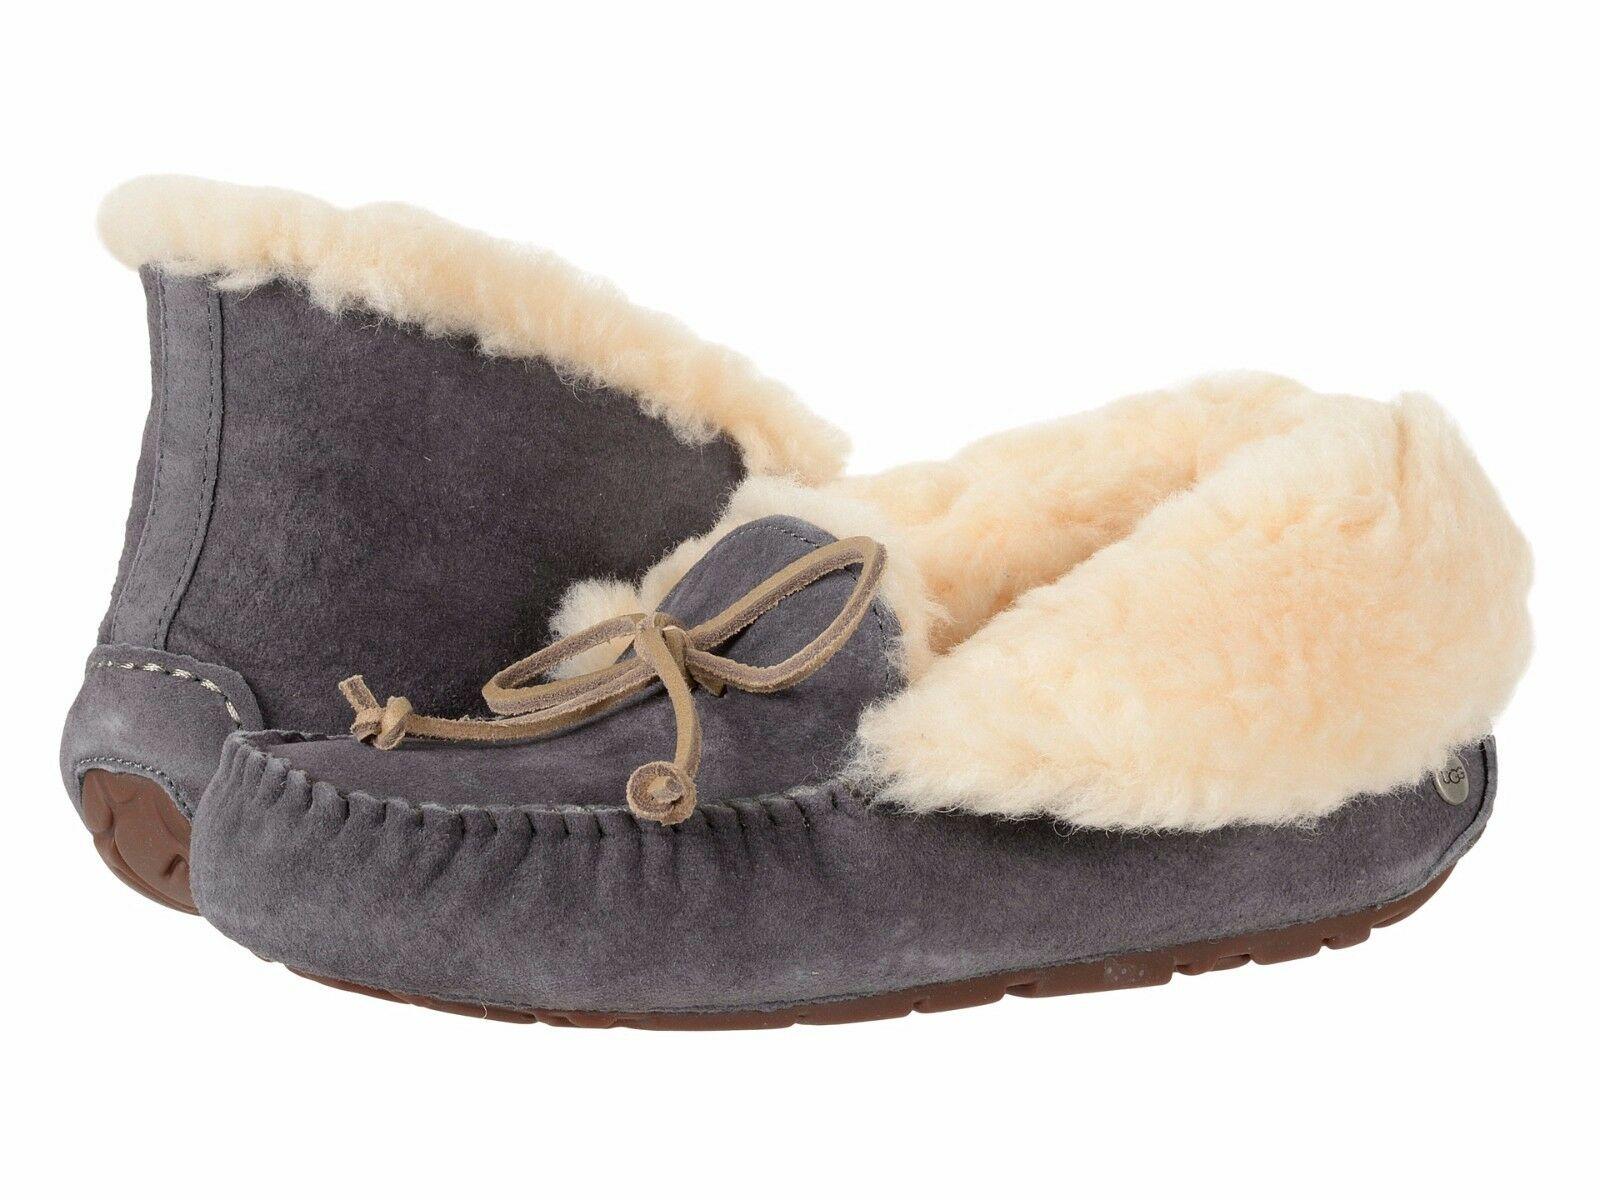 Women's Shoes UGG ALENA Suede Moccasin Slippers 1004806 NIGHTFALL *New*